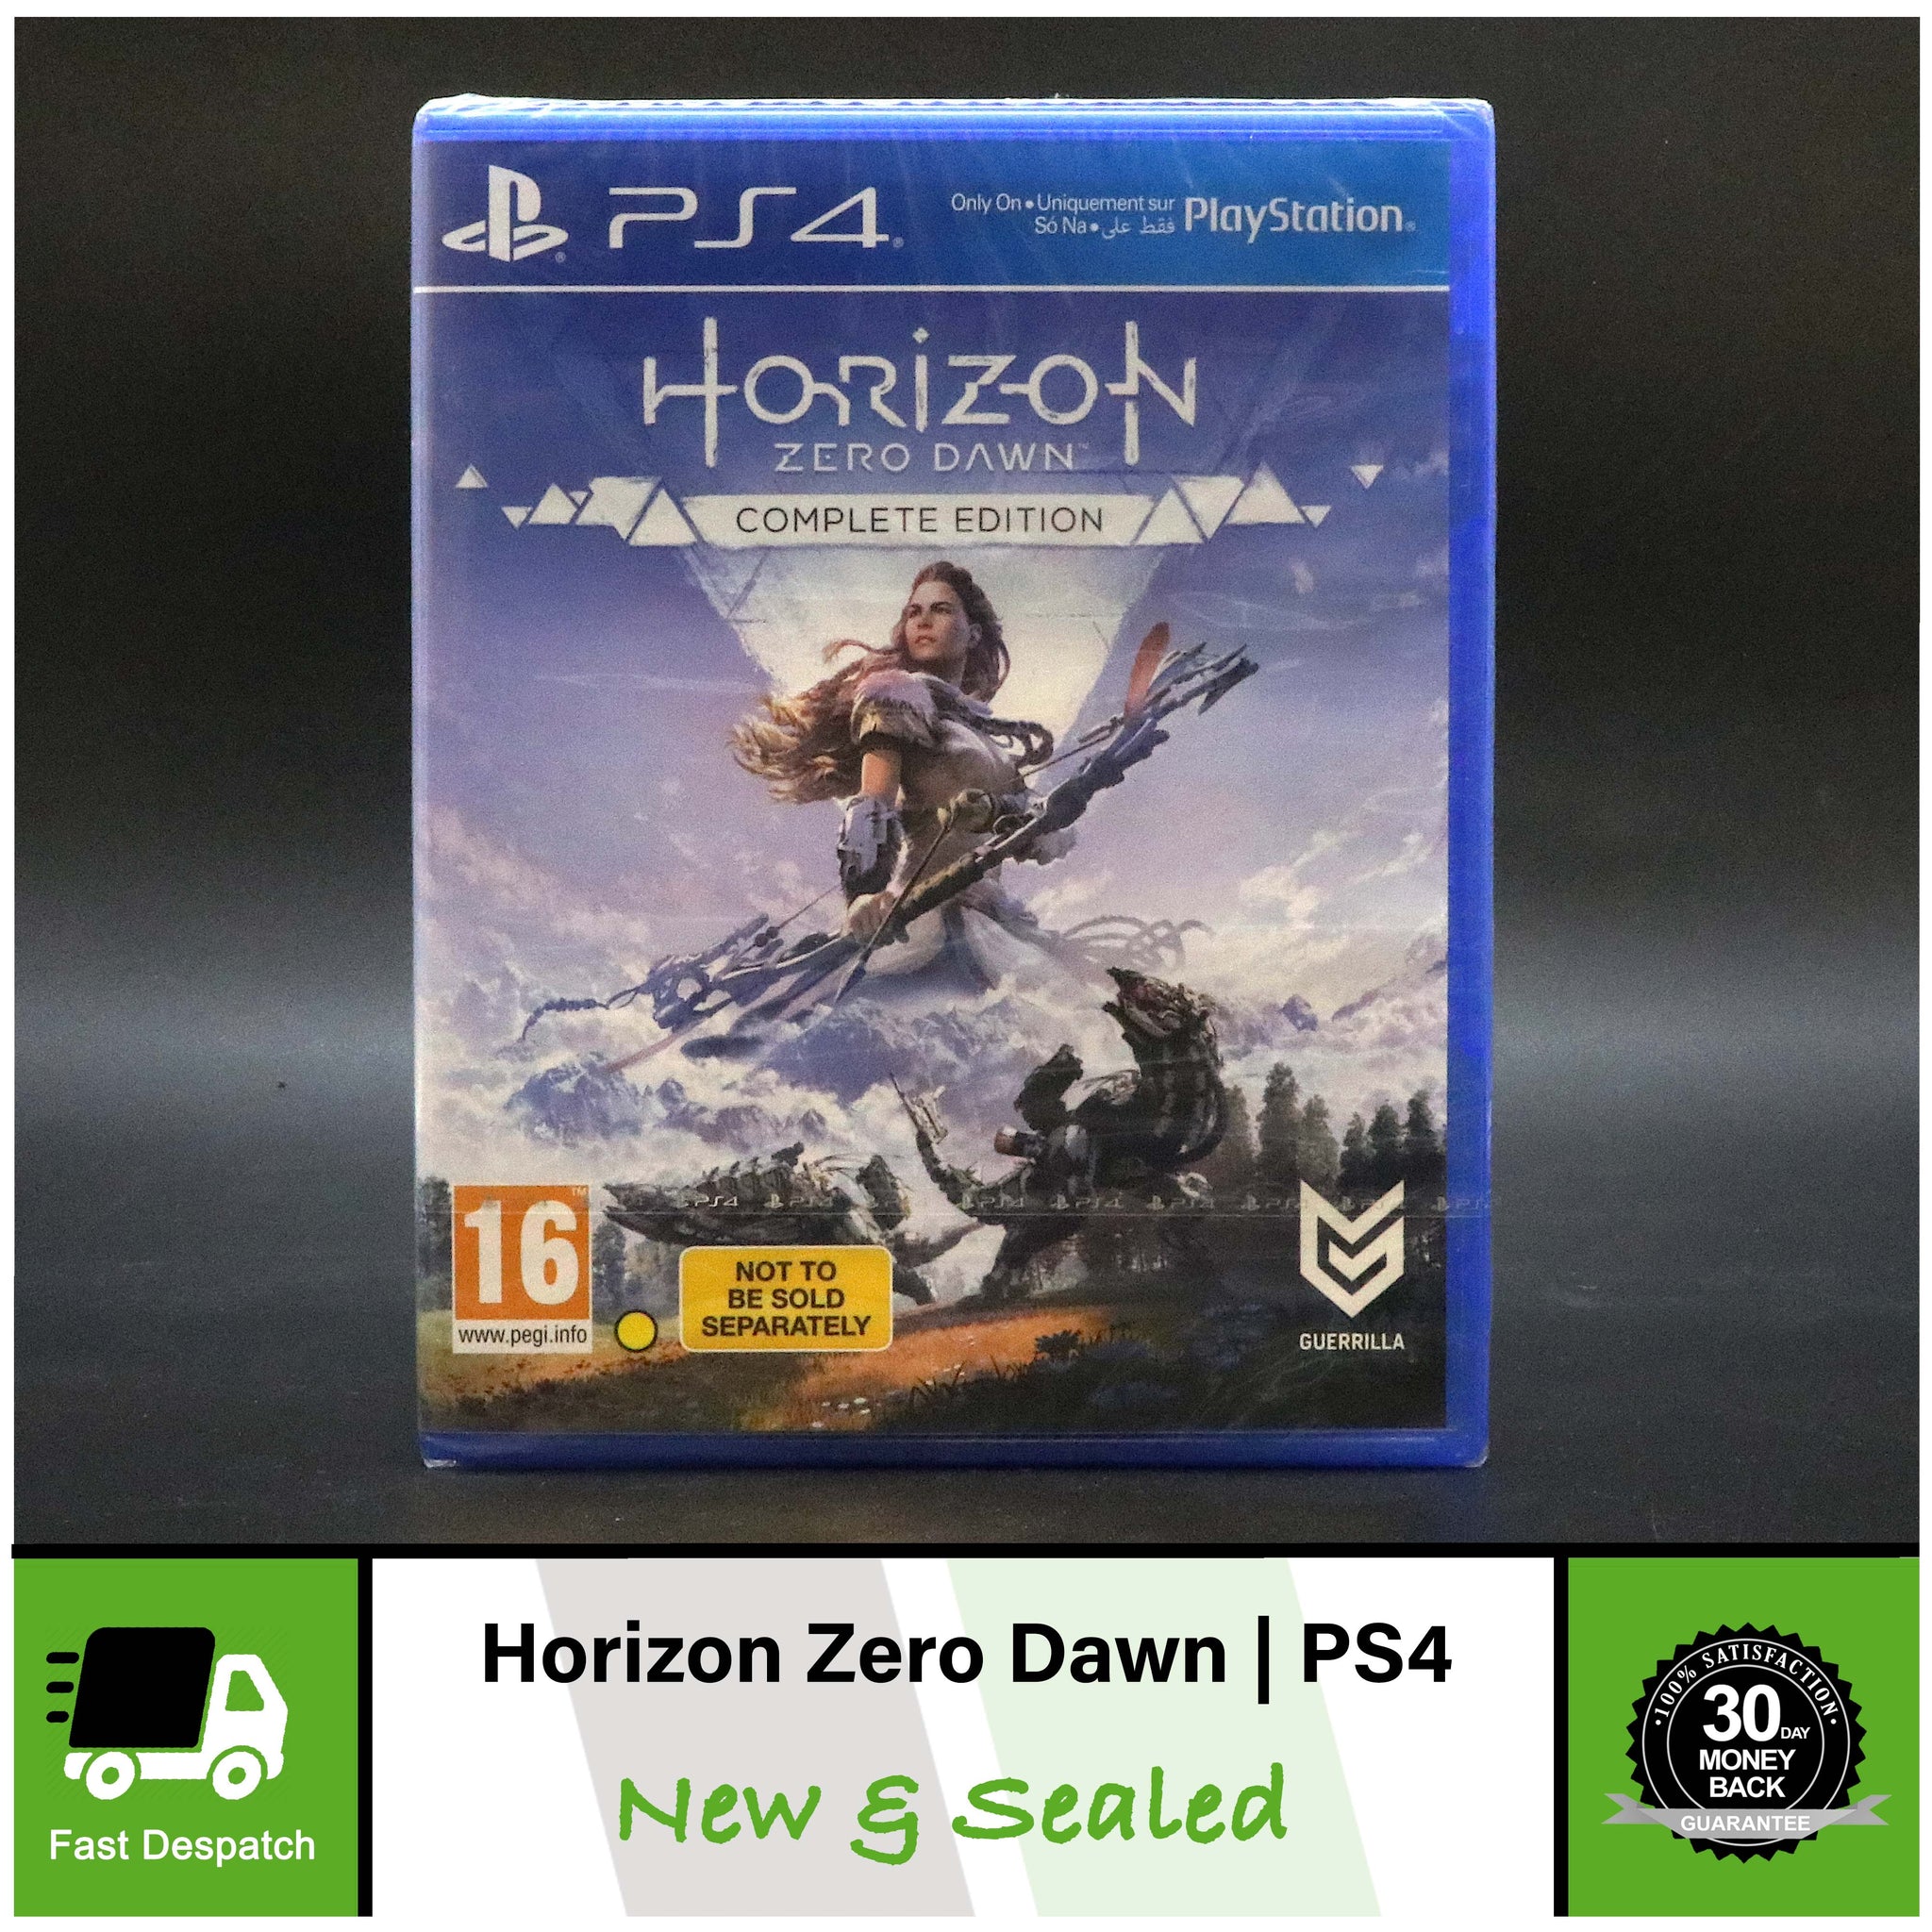 Horizon Zero Dawn | Complete Edition | Sony Playstation 4 PS4 Game | New Sealed